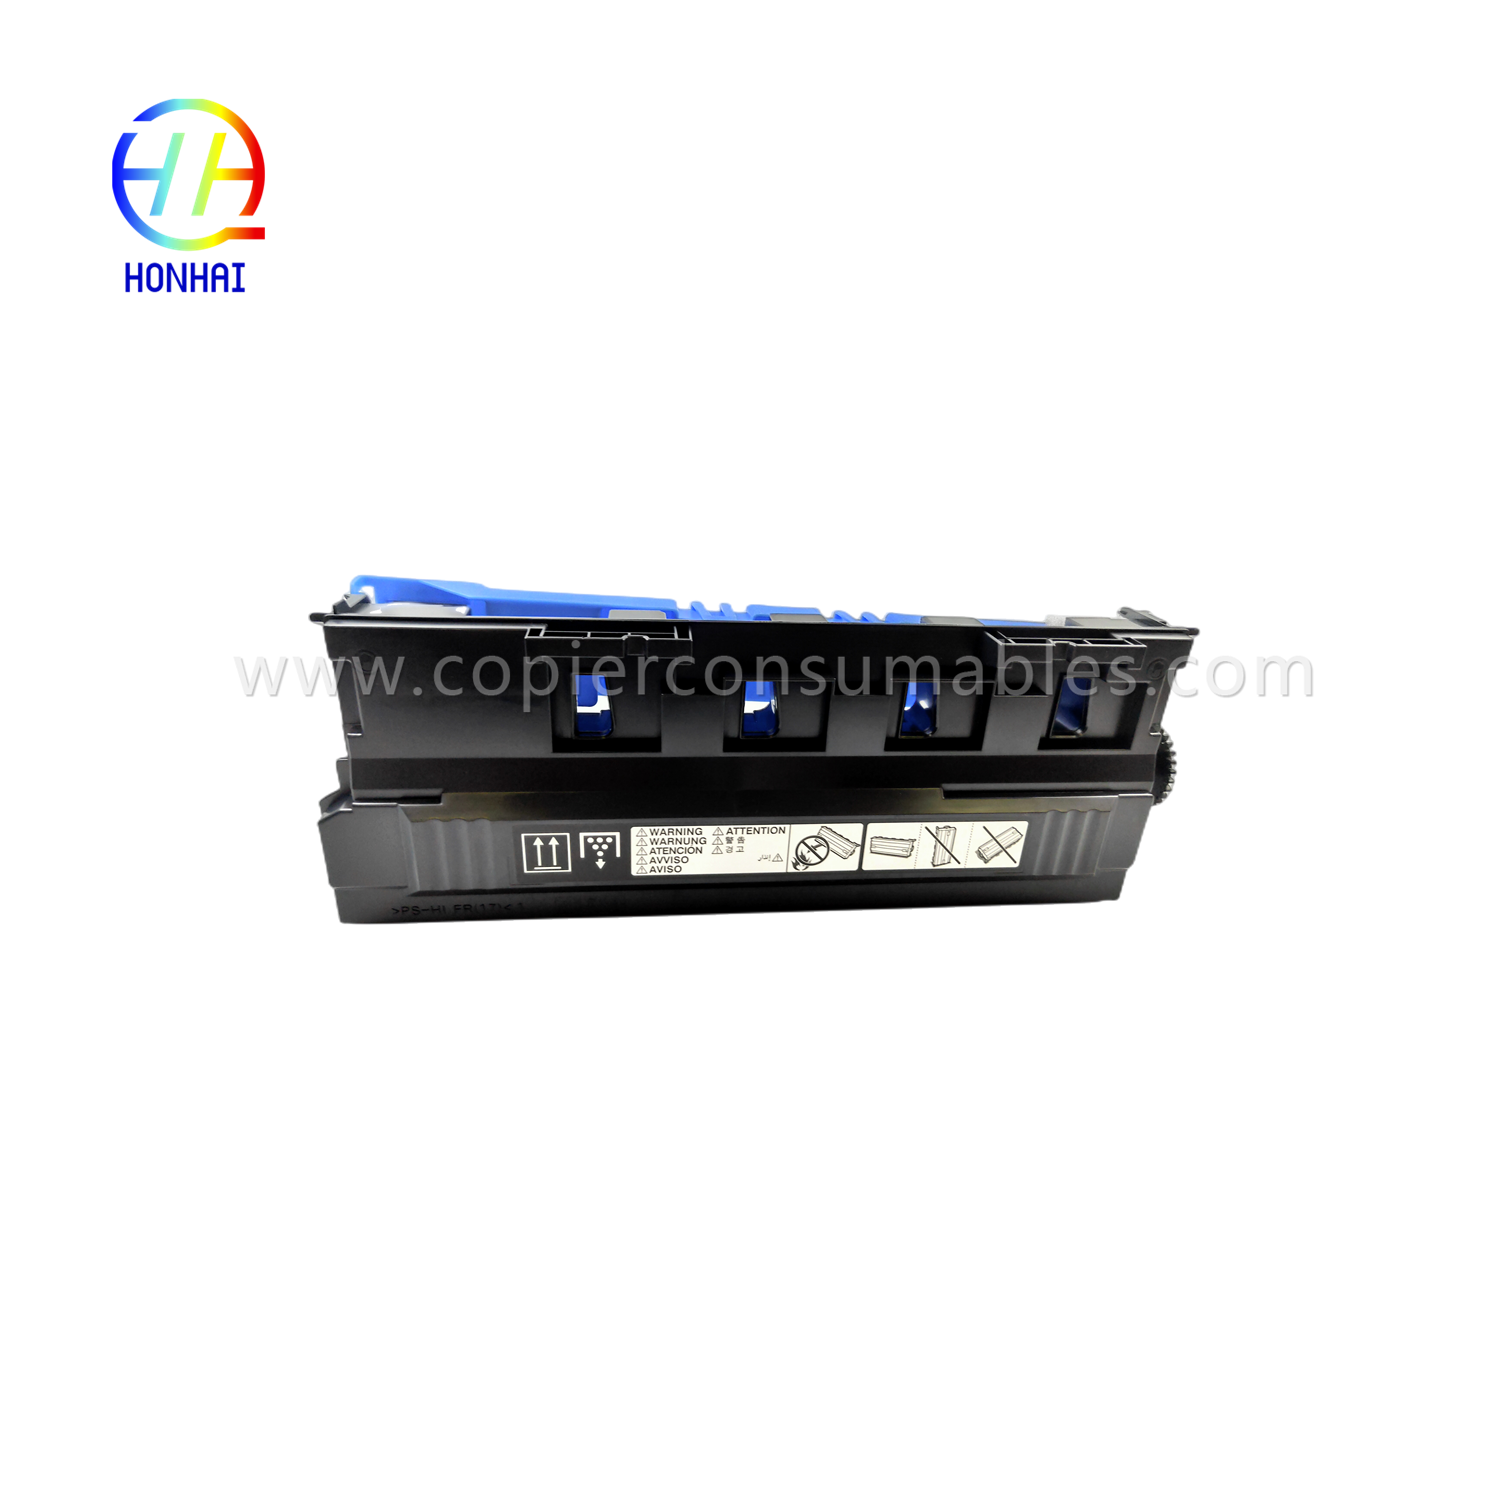 https://c585.goodao.net/waste-toner-container-for-konica-minolta-bizhub-c226-c256-c266-c227-c287-c367-c7333-c7226-c7528-wx-105-a8jjwy1-waste-waste-waste toner-box-product/